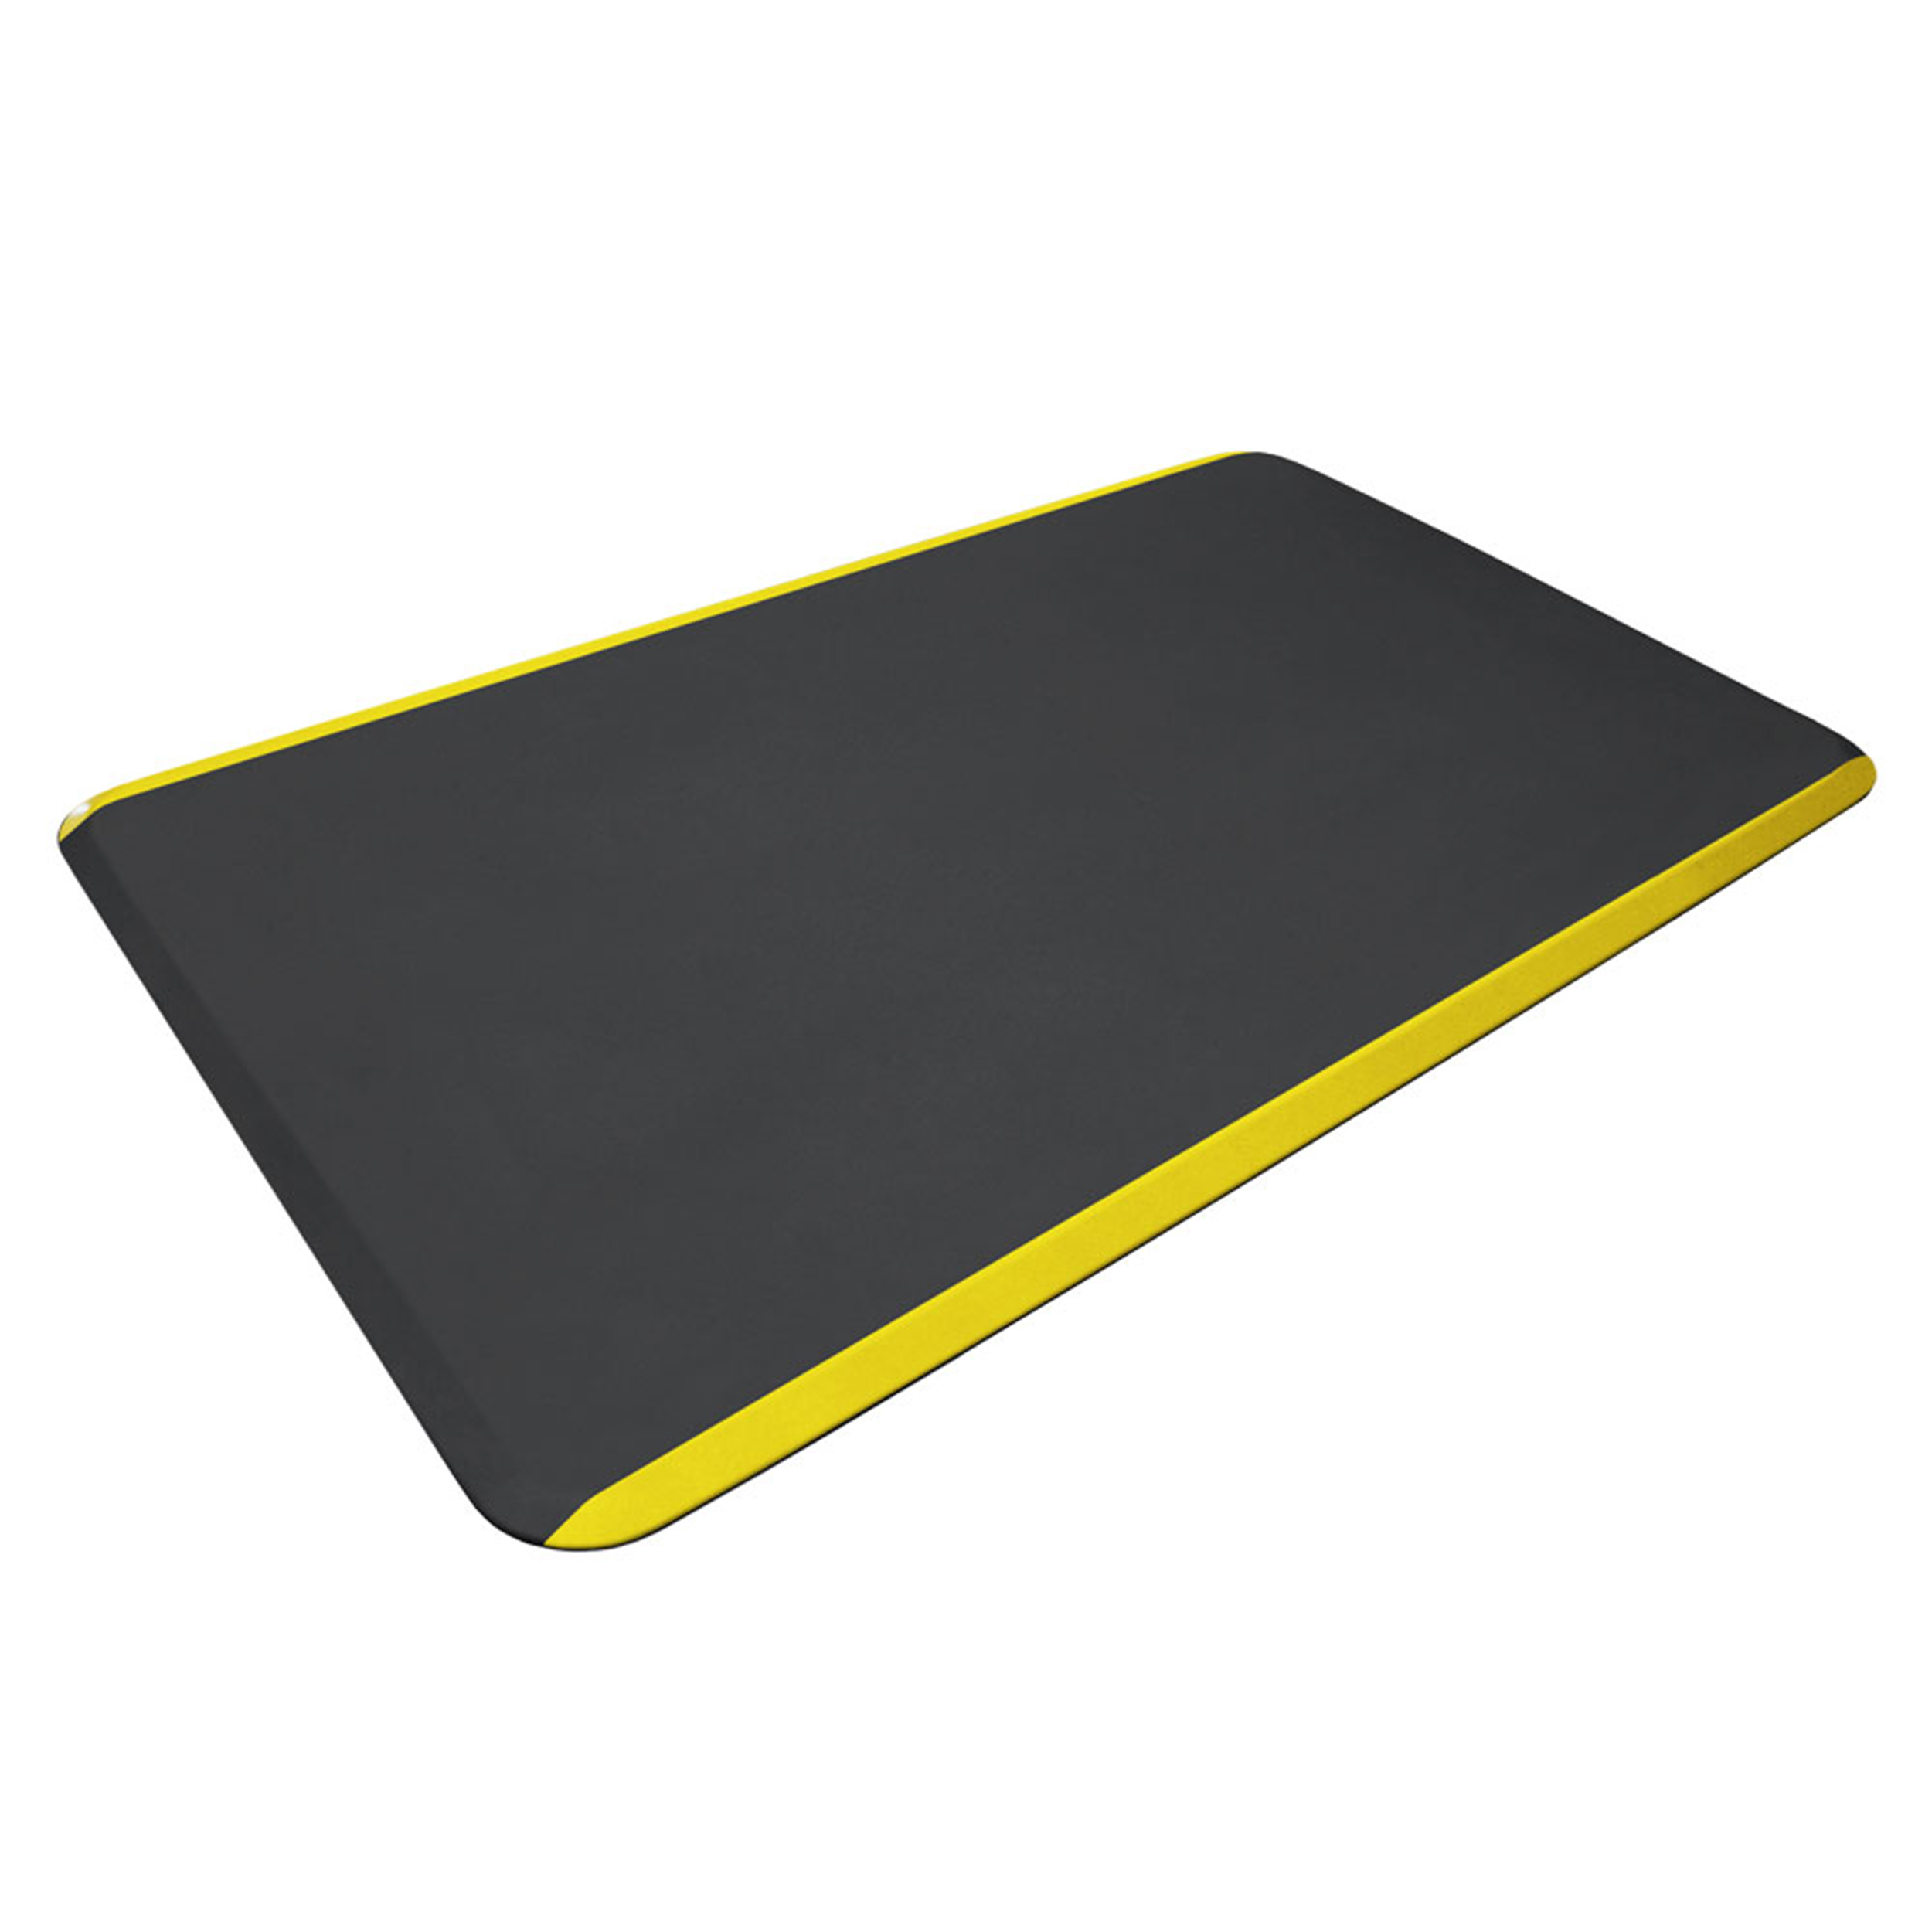 Eco-pro Commercial Mat, Black With Yellow Safety Stripe, 36" X 60"